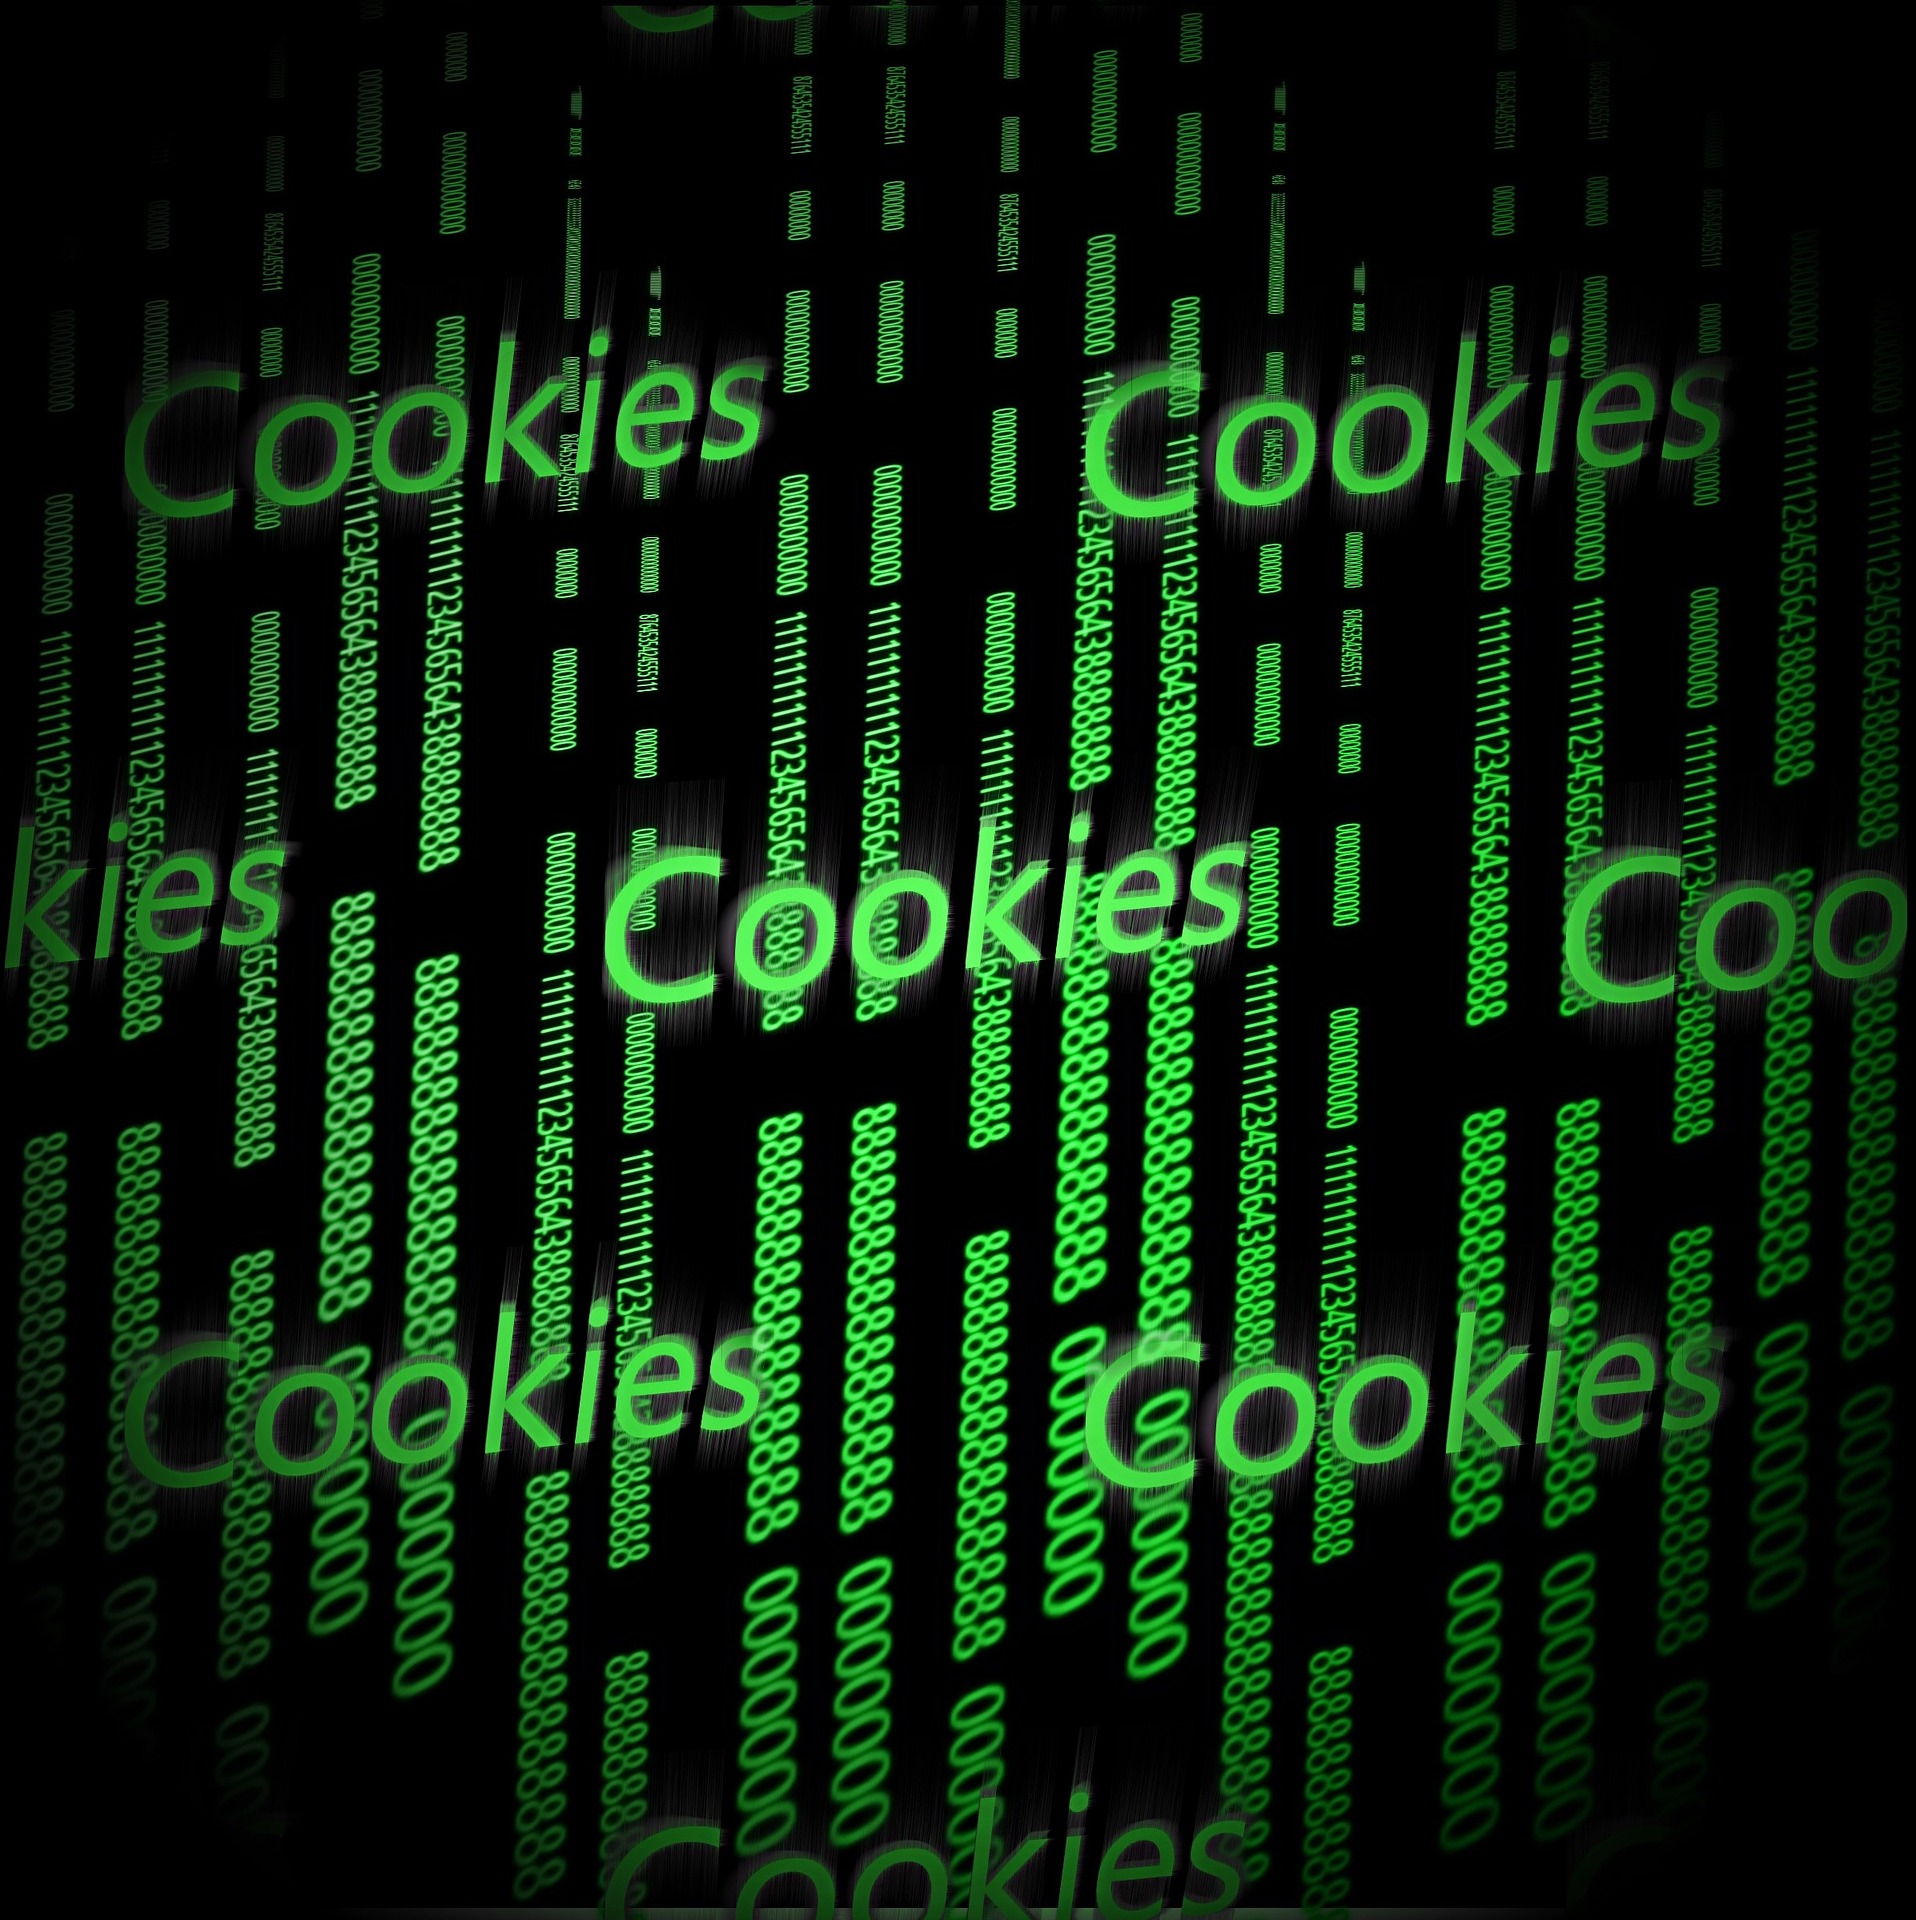 cache and cookies